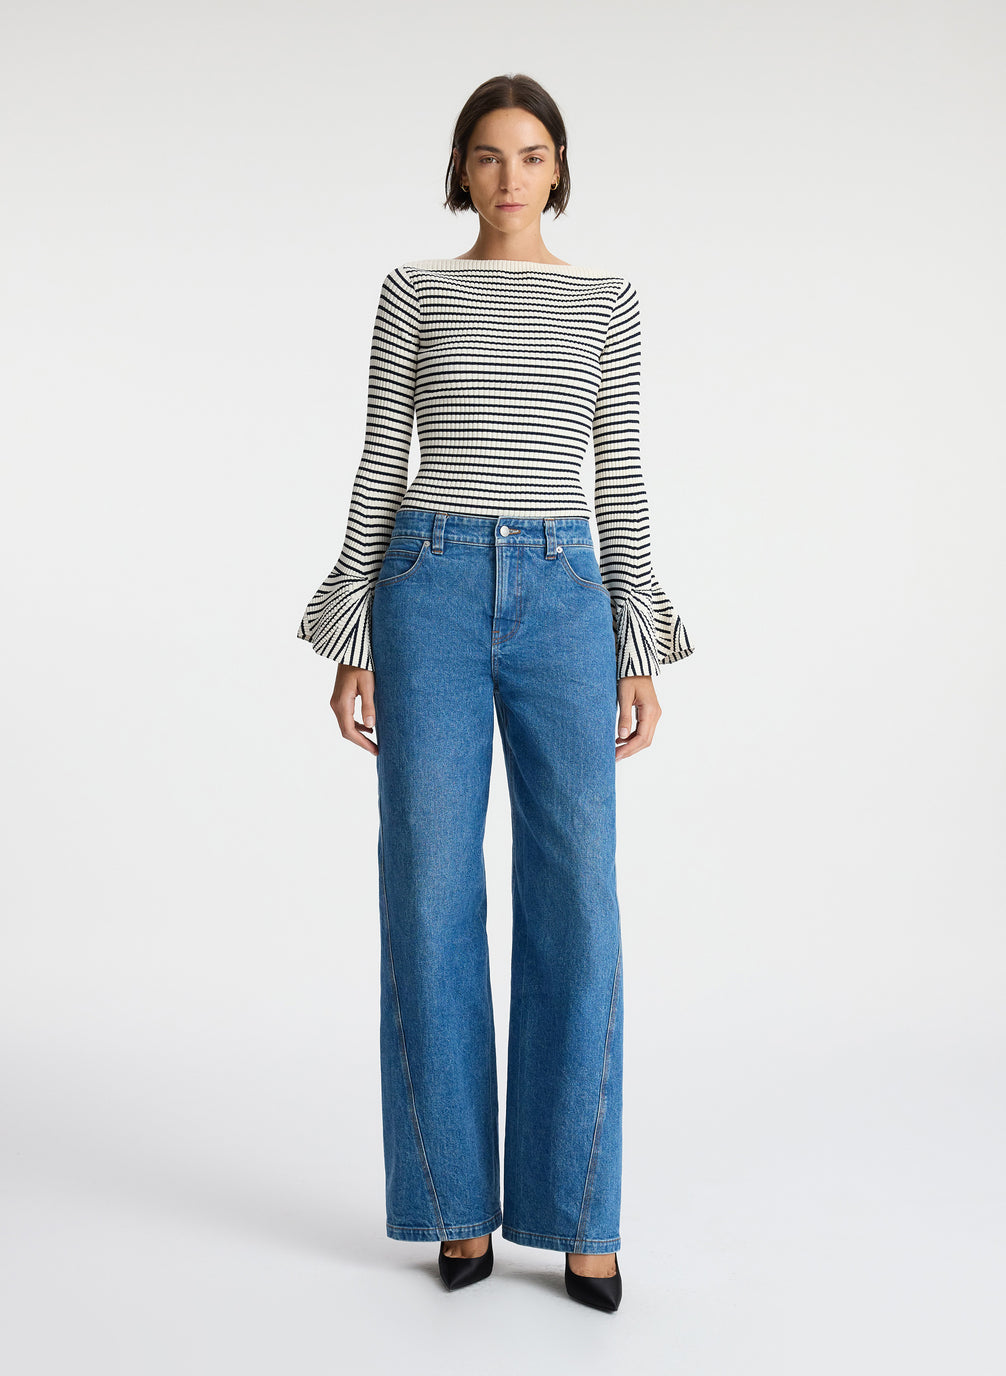 front view of woman wearing striped long bell sleeve knit top and medium blue wash denim jeans